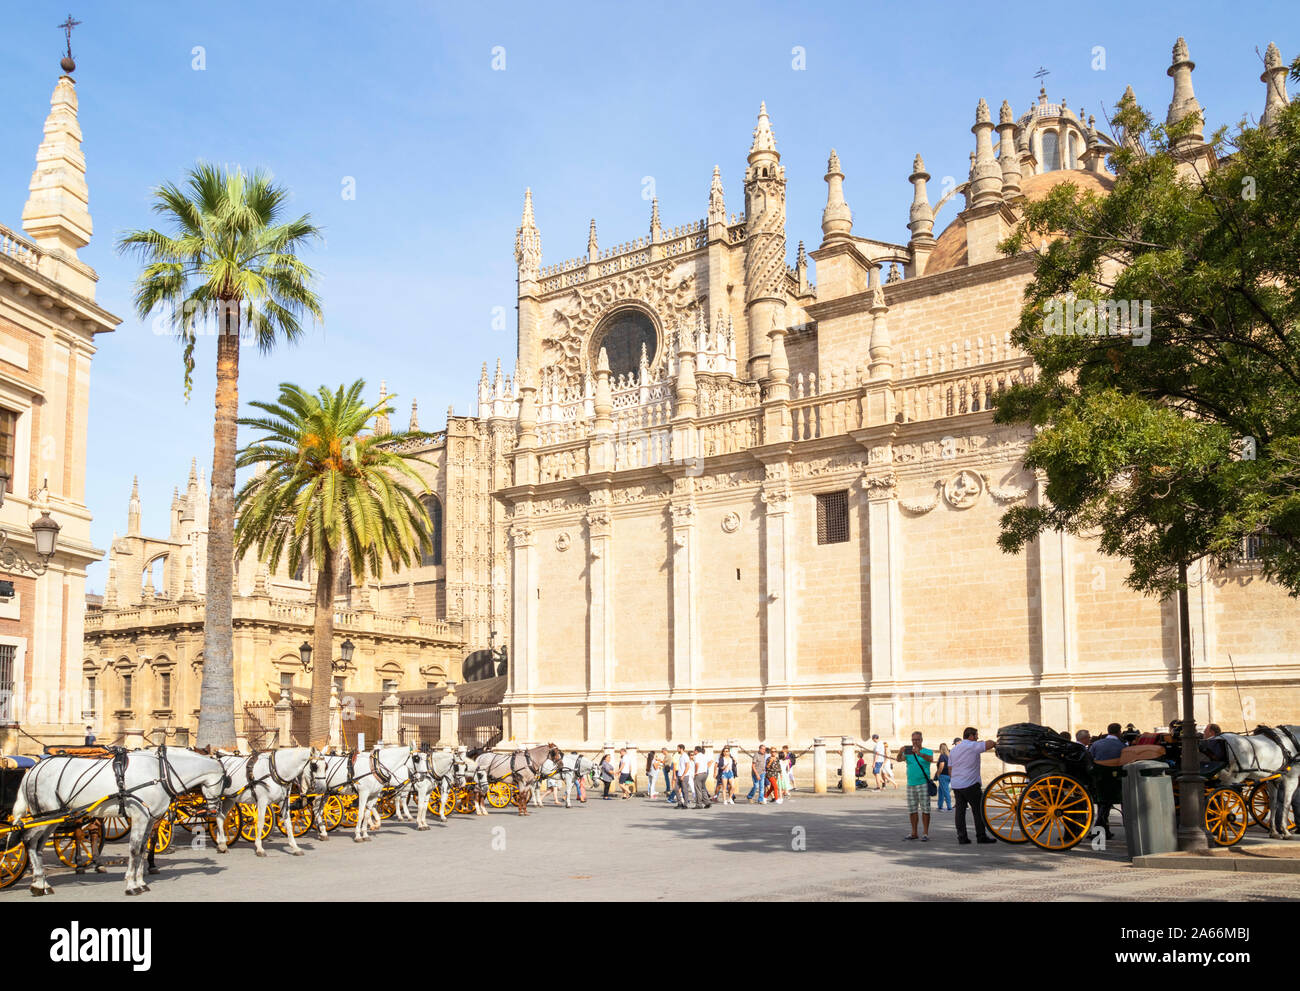 Seville carriage rides offered outside Seville cathedral and the General Archive of the Indies building Calle Miguel Mañara Seville Spain EU Europe Stock Photo